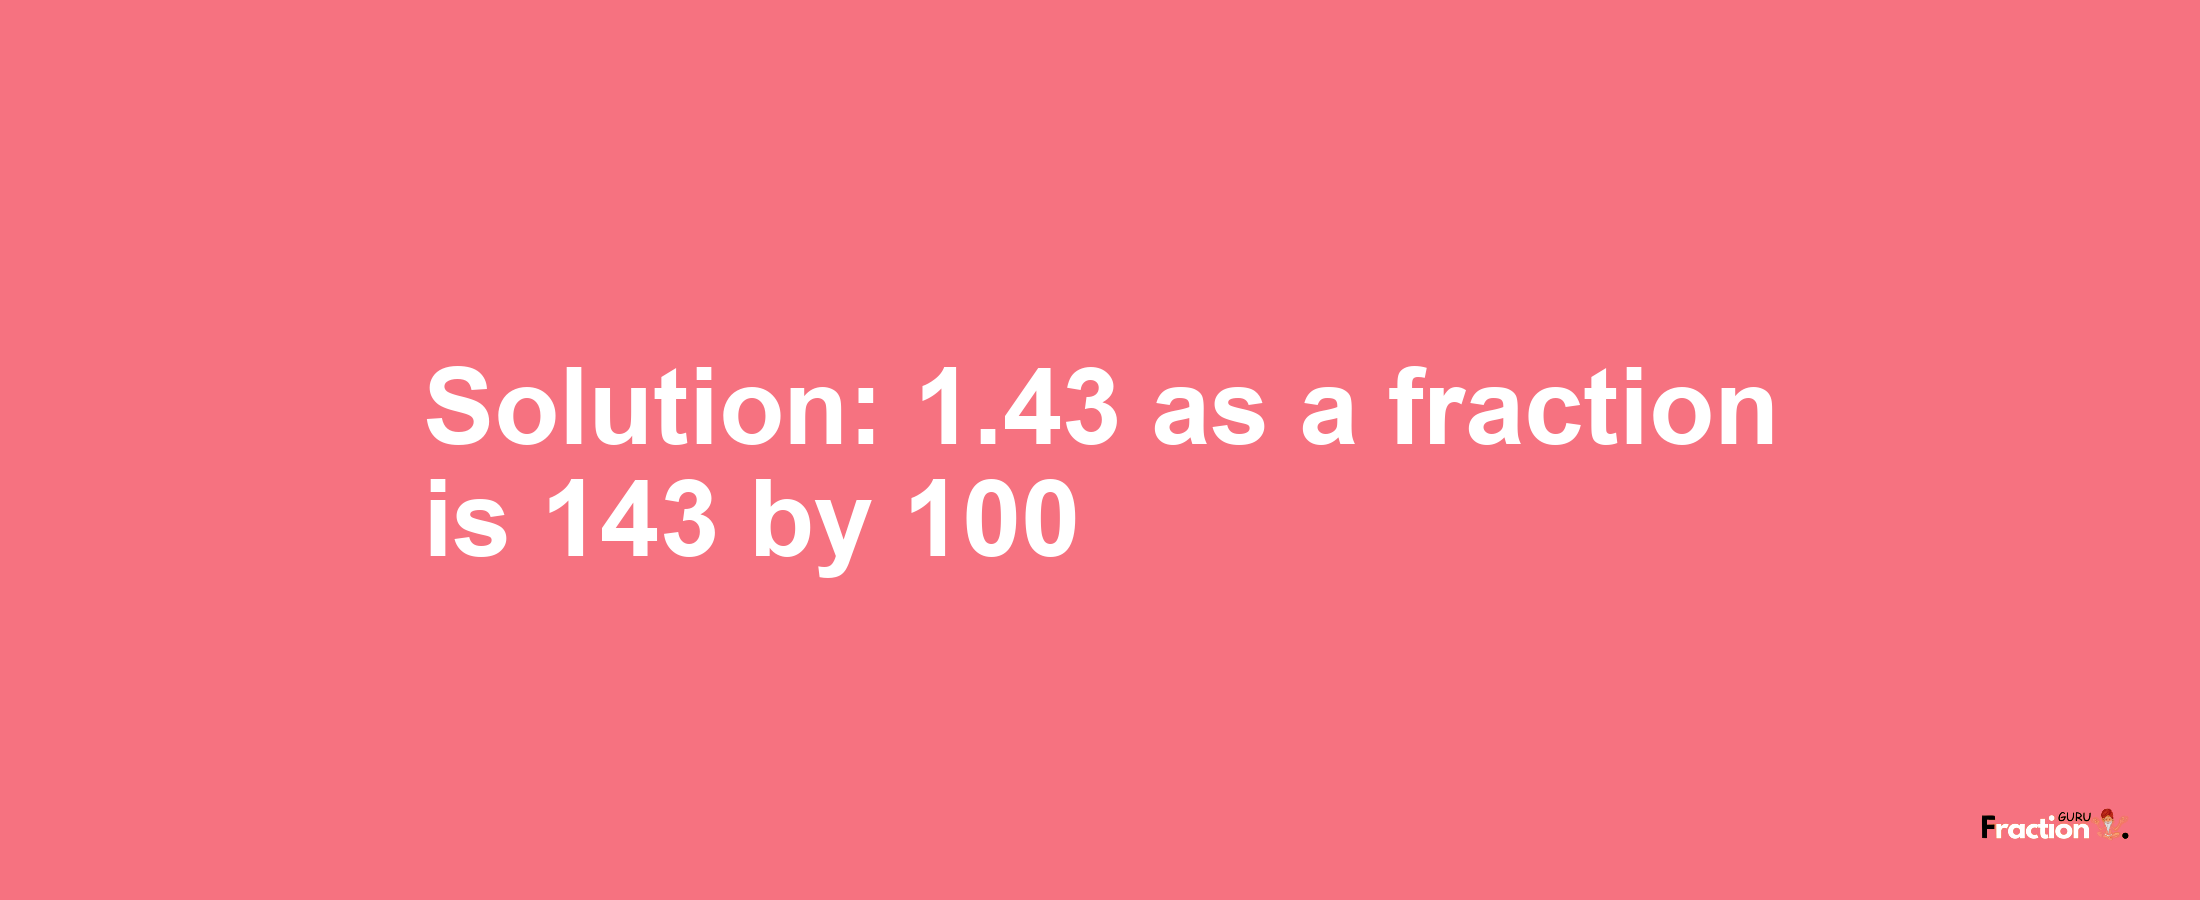 Solution:1.43 as a fraction is 143/100